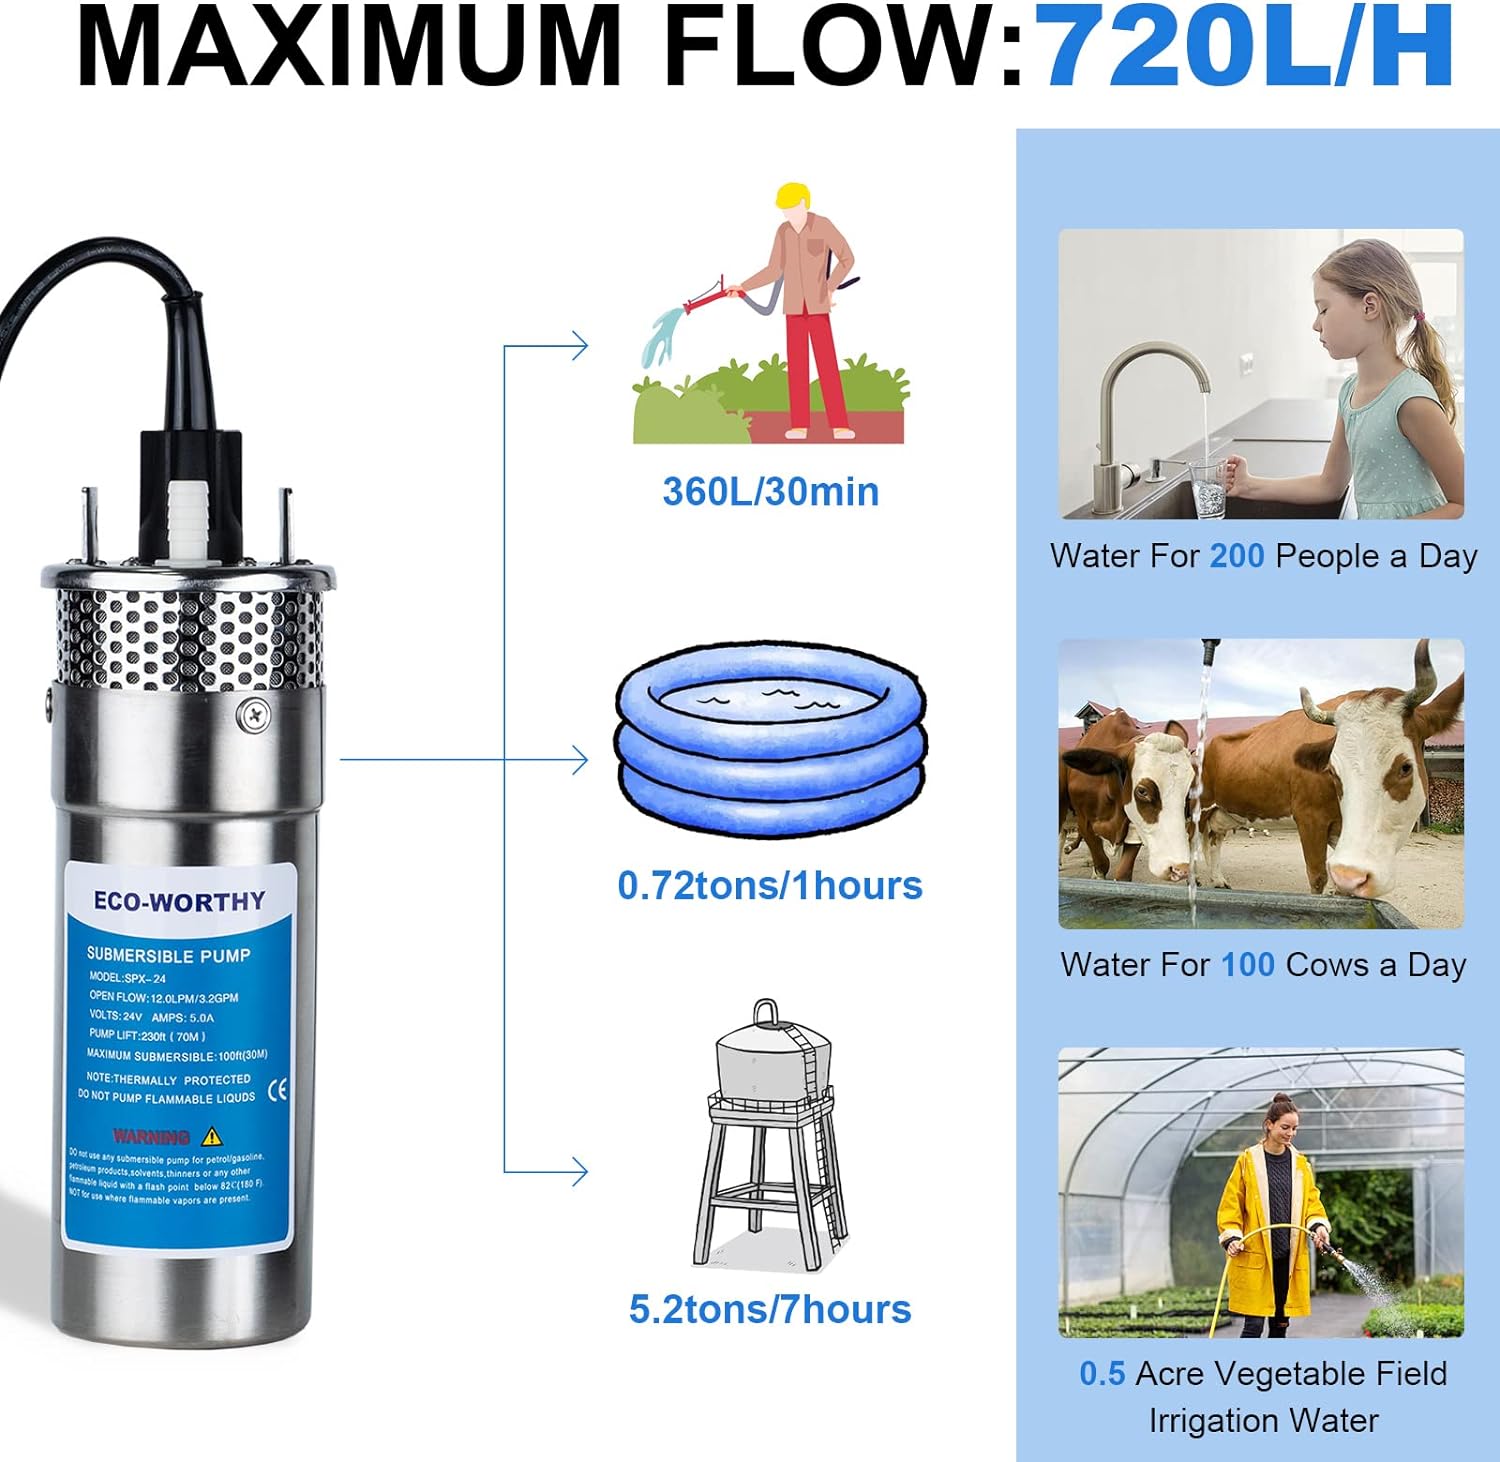 ECO-WORTHY 24V Well Pump 3.2GPM 4 Stainless Steel, Max Lift 230FT Deep Well Water Pump/Alternative Energy Solar, Well Pump Solar Water Pump